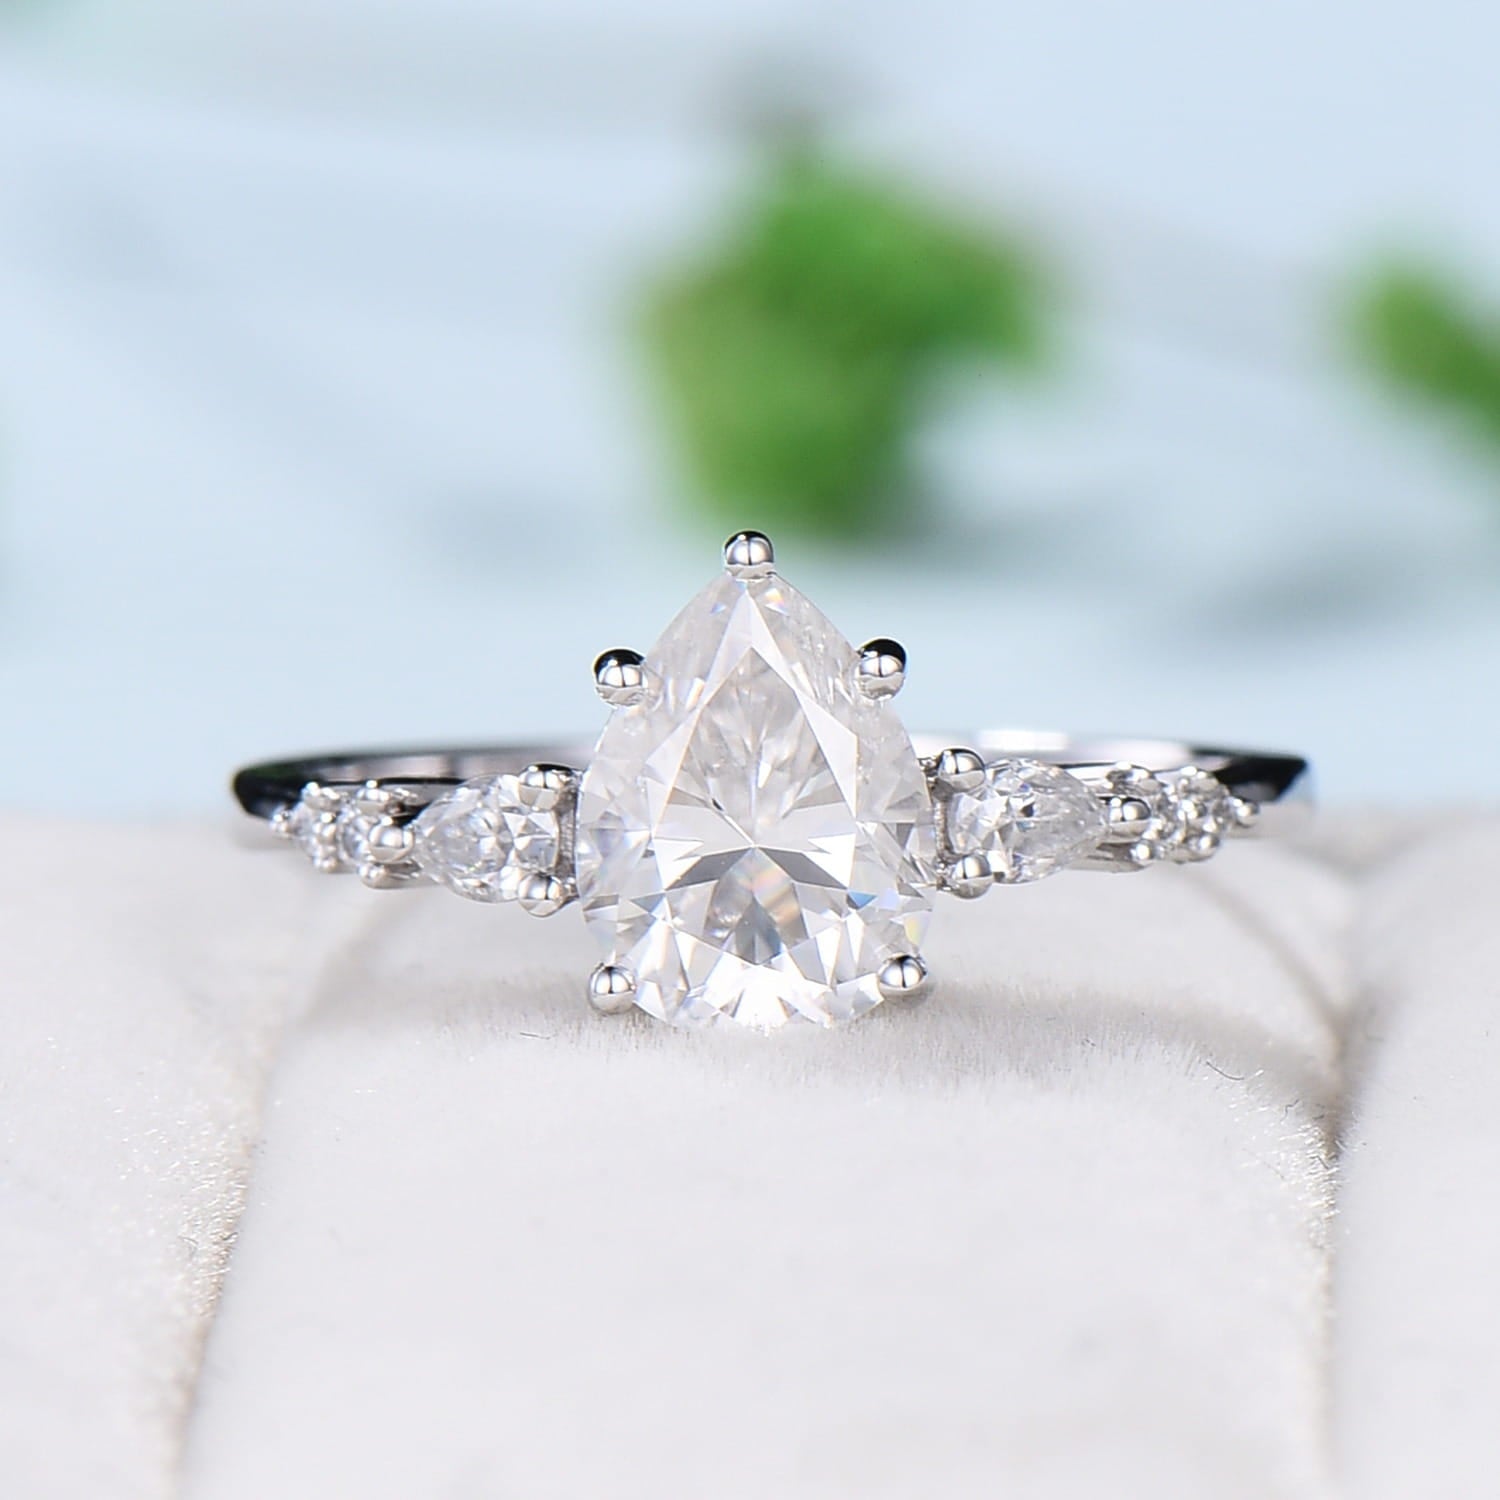 1.25CT pear shaped moissanite ring vintage 7 stone Moissanite engagement ring white gold Wedding Ring Women Unique Bridal Ring Proposal Gift - PENFINE